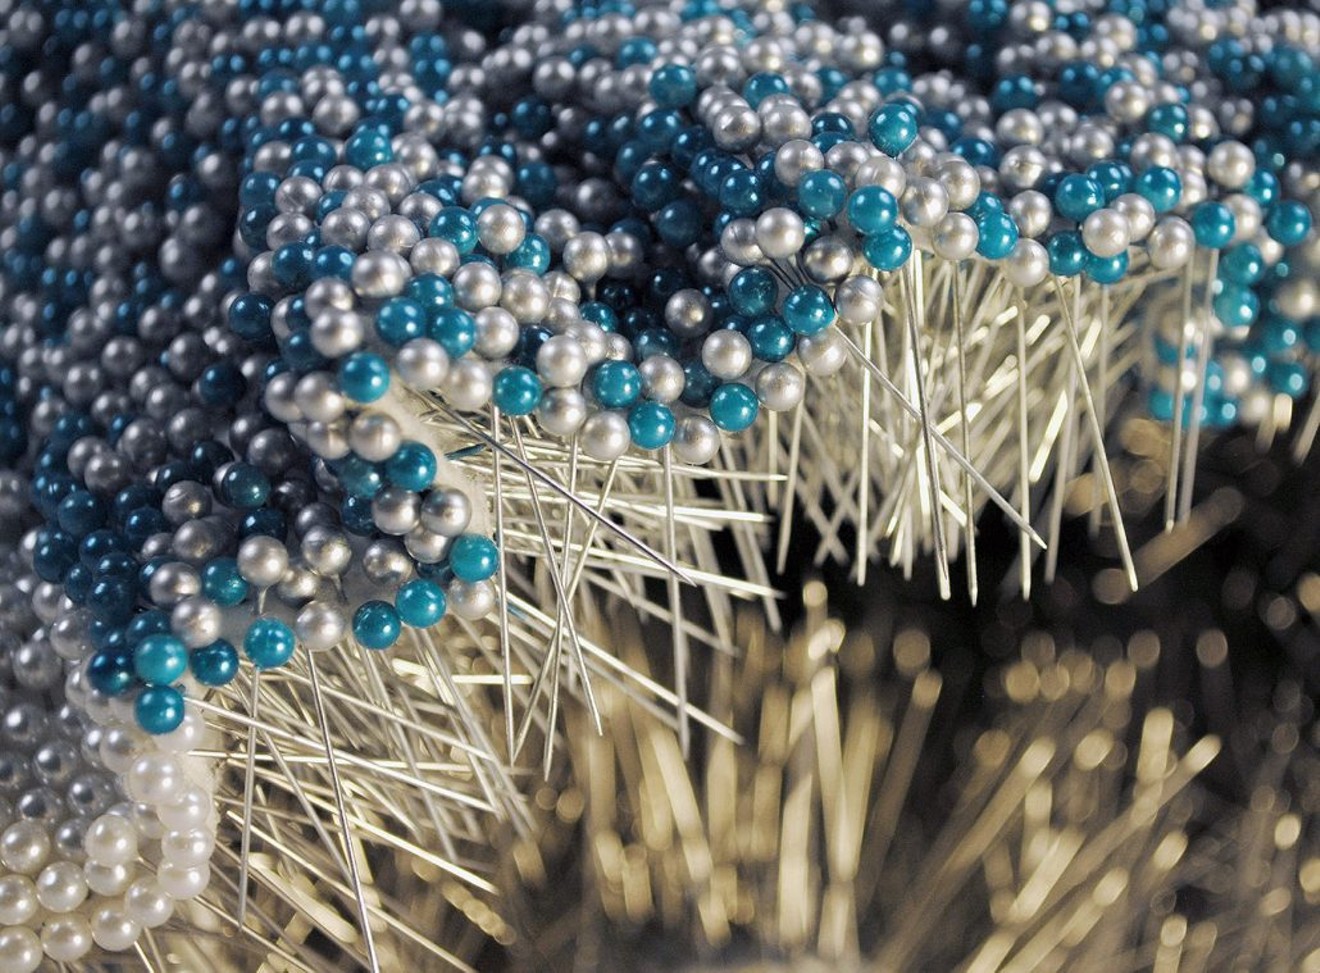 Angela Ellsworth, Pantaloncini: Work No. 069 (Emma) (detail)
2017, 52,692 pearl corsage pins and colored dress pins, fabric, steel, 28 x 38 x 17 inches4 / 21.